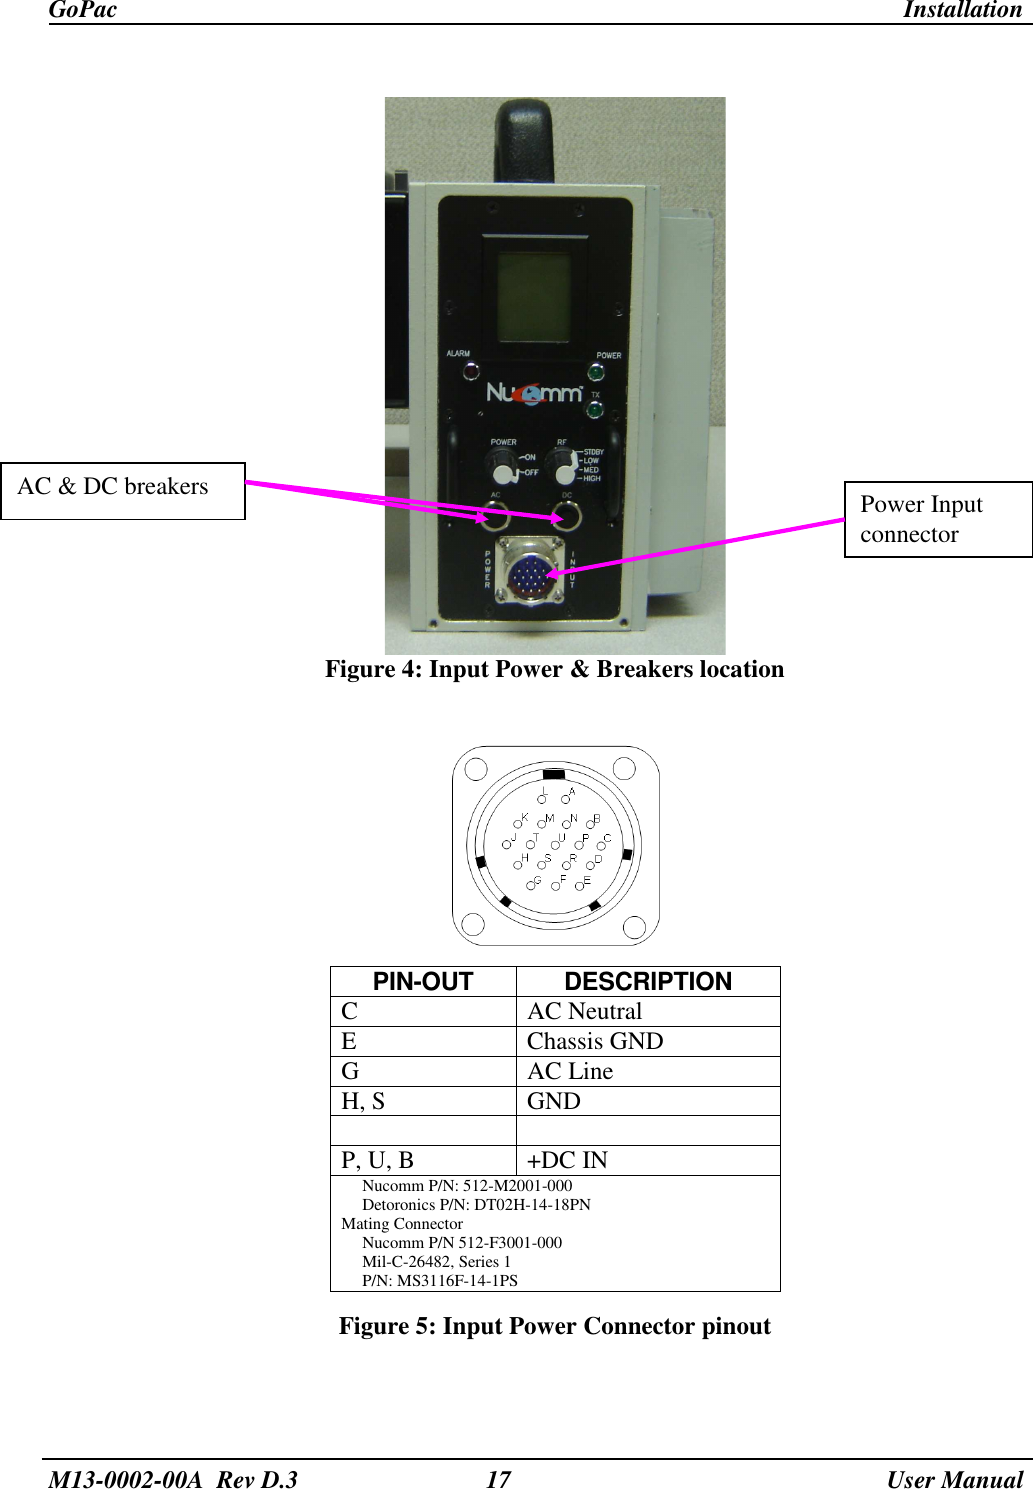 GoPac    Installation  M13-0002-00A  Rev D.3  17    User Manual   Figure 4: Input Power &amp; Breakers location              Figure 5: Input Power Connector pinout   PIN-OUT  DESCRIPTION C  AC Neutral E  Chassis GND G  AC Line H, S  GND    P, U, B  +DC IN      Nucomm P/N: 512-M2001-000      Detoronics P/N: DT02H-14-18PN  Mating Connector      Nucomm P/N 512-F3001-000      Mil-C-26482, Series 1      P/N: MS3116F-14-1PS AC &amp; DC breakers  Power Input connector 